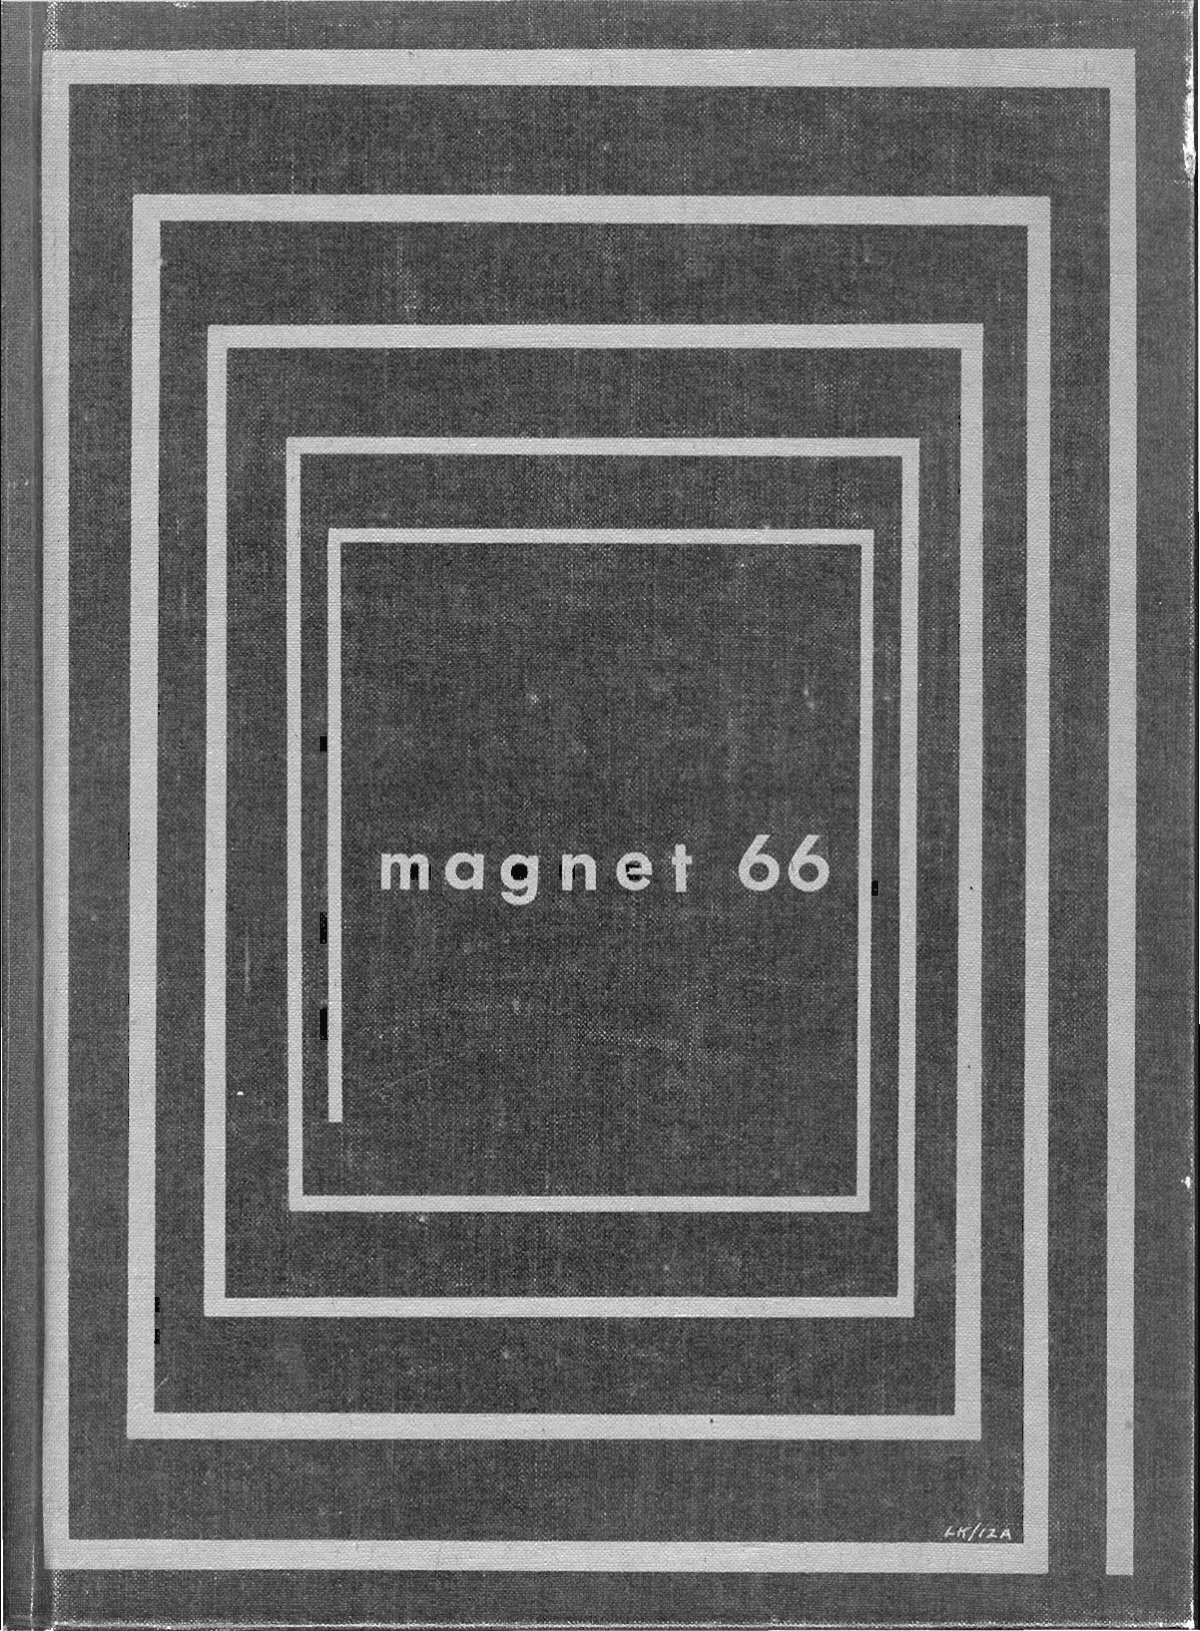 1966 Magnet Yearbook